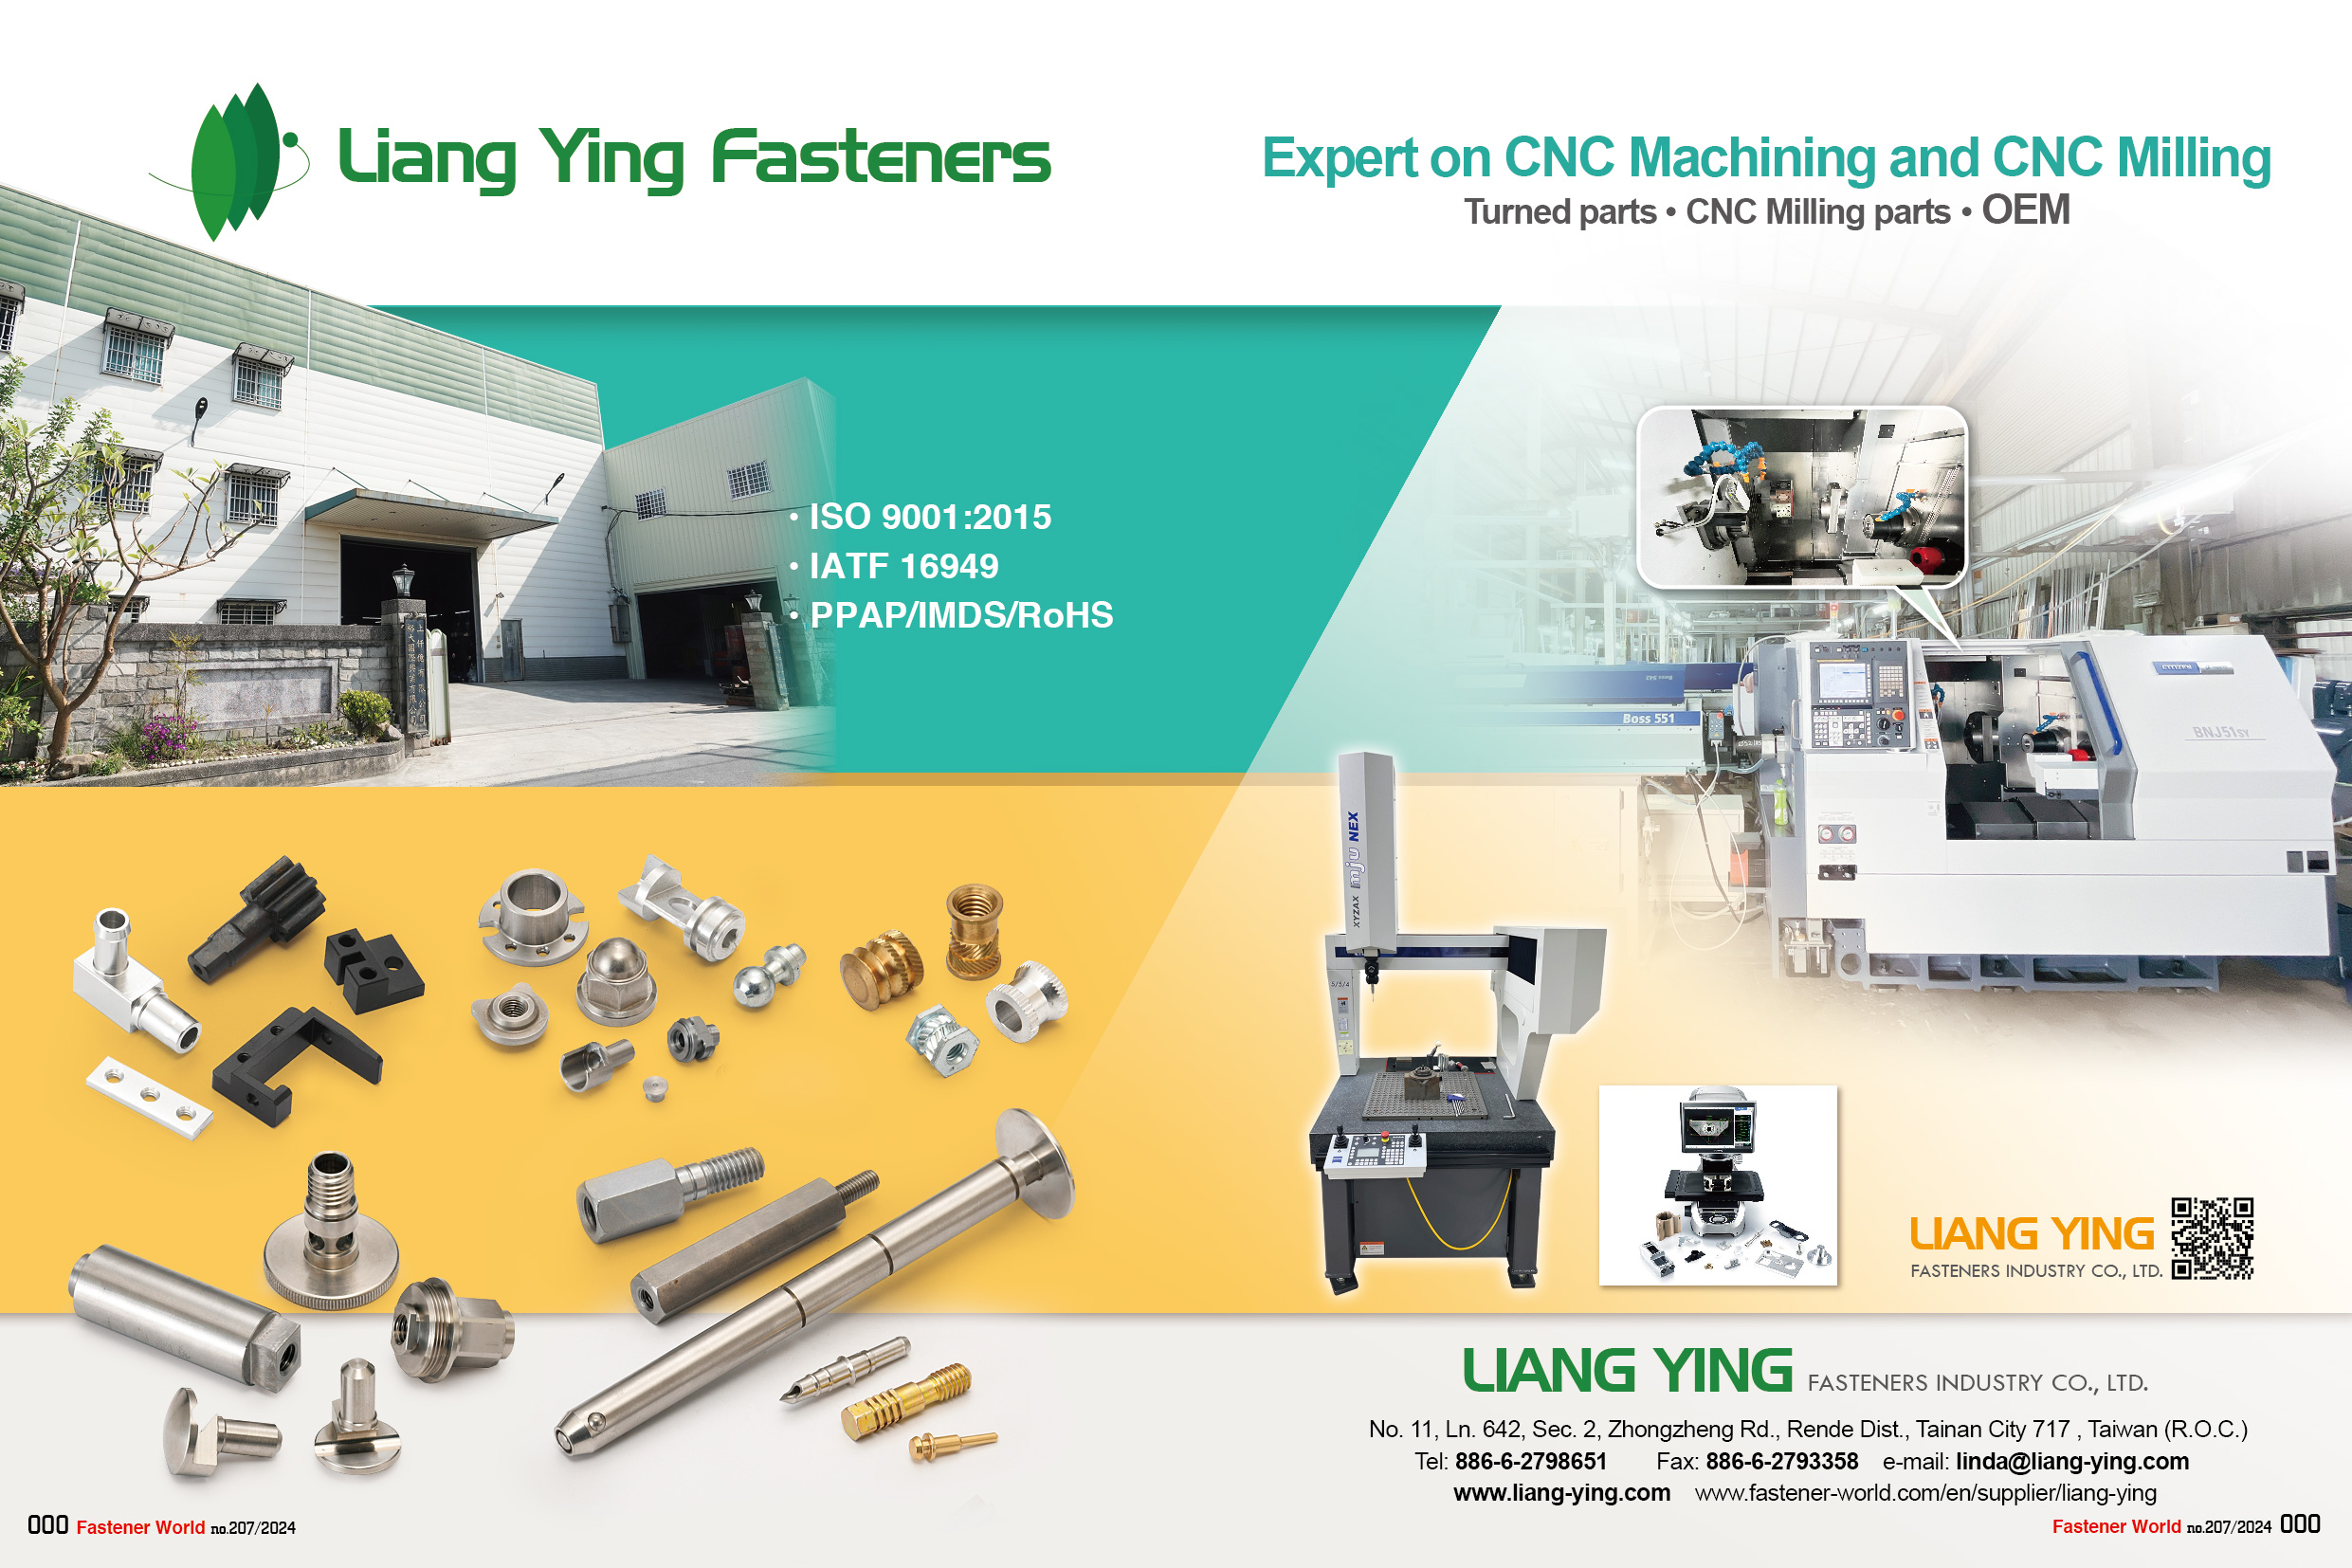 Liang Ying Fasteners Industry Co., Ltd. , CNC Machining, CNC Milling Parts, Turned Parts, OEM